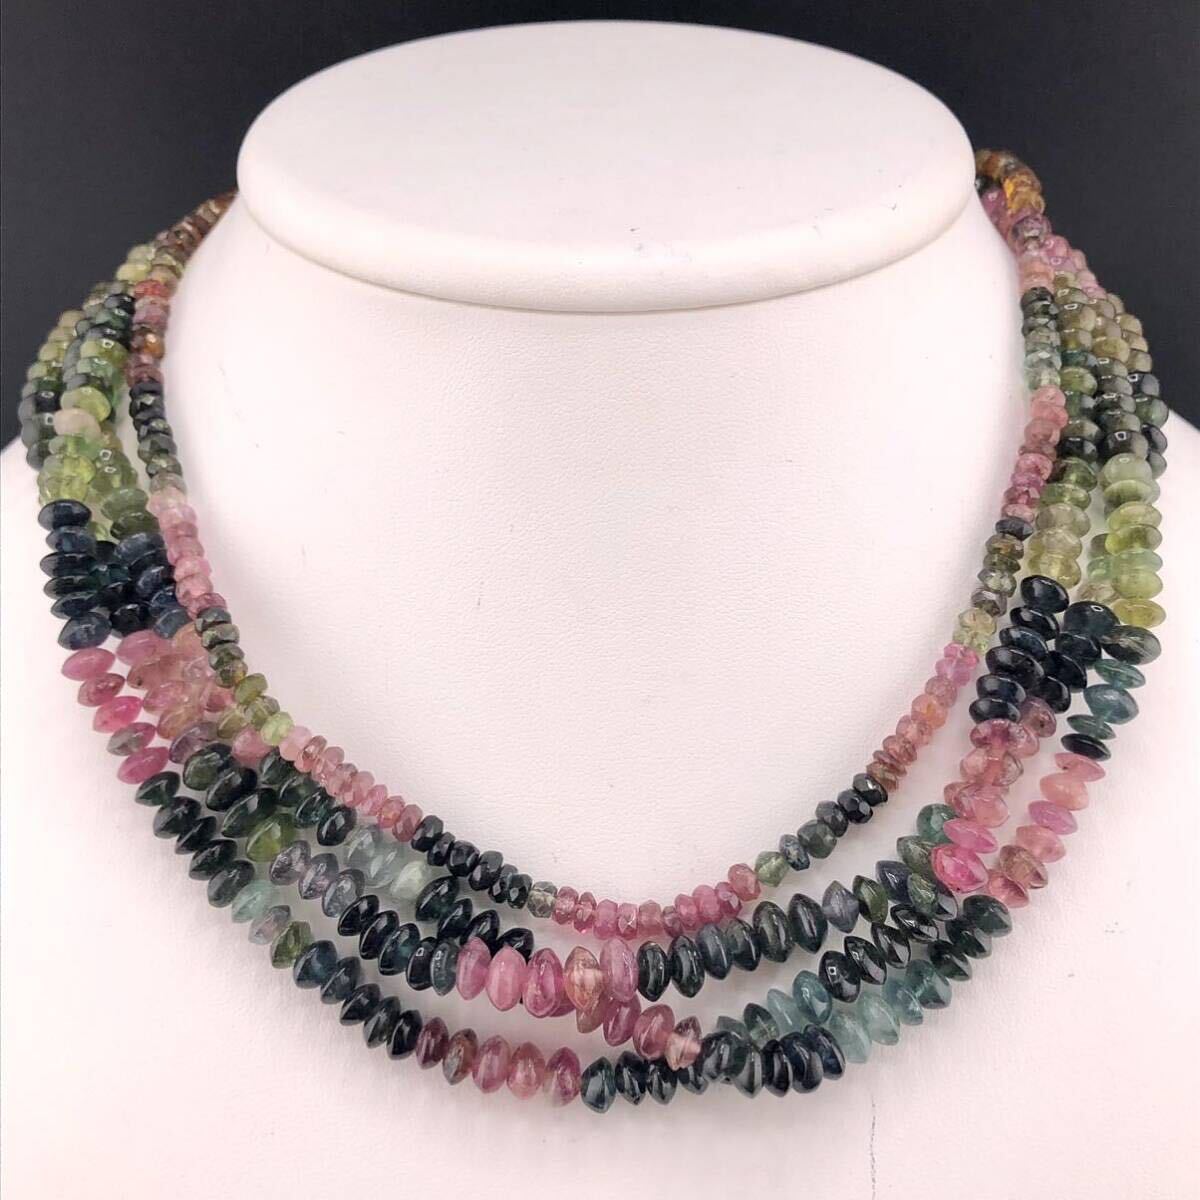 E03-5681 5682★ 【2点SET☆トルマリンネックレス】総重量86g ( tourmaline necklace K18 SILVER jewelry )の画像3